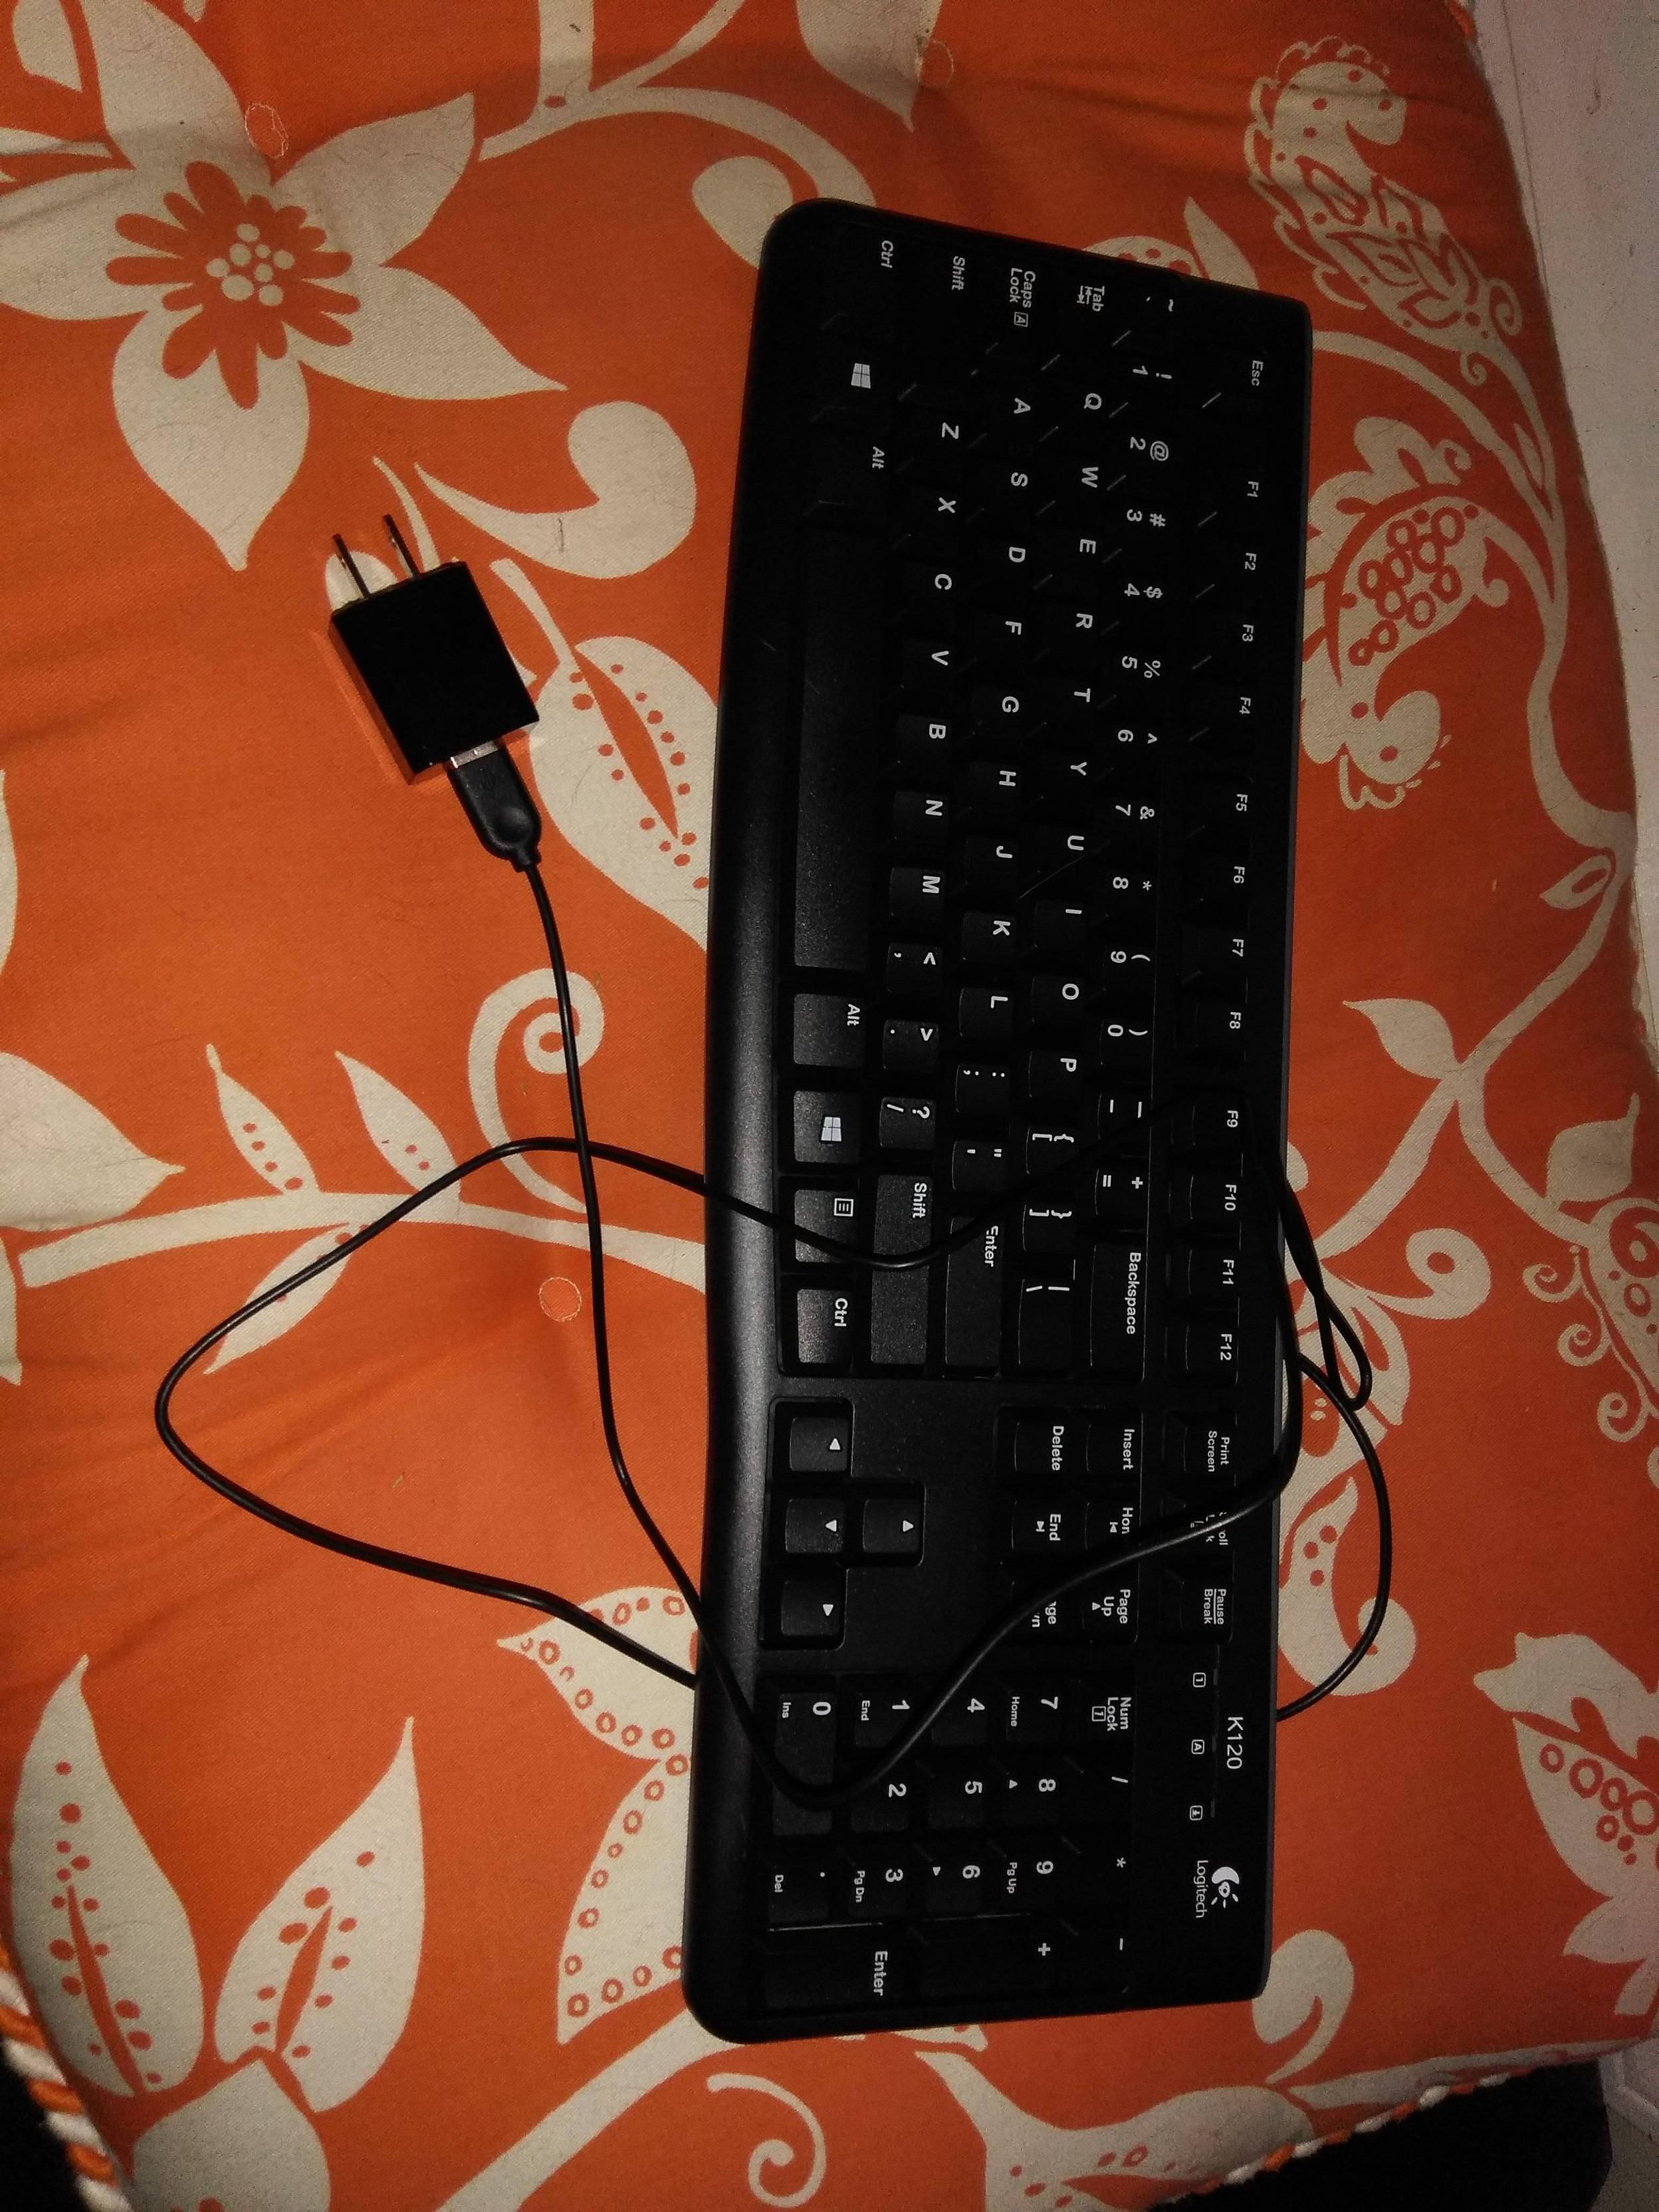 My grandmother was having problems with her new wired keyboard. She brought it with her when she visited. This is what I found.